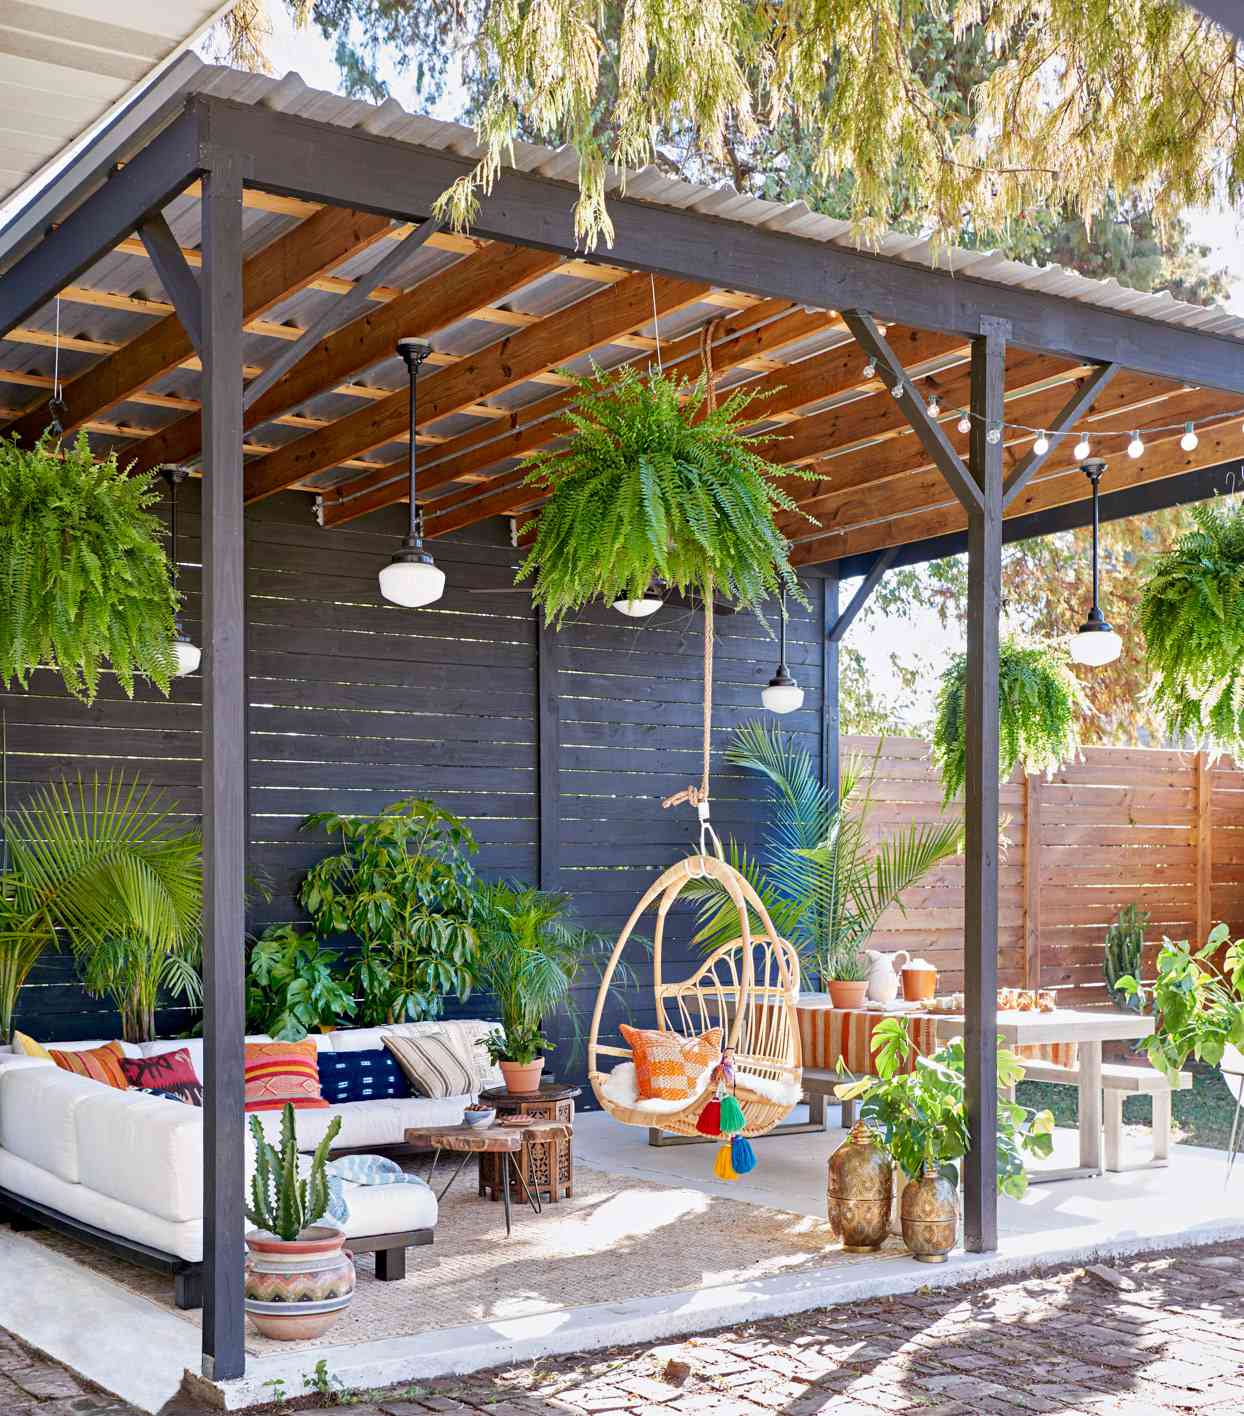 20 Colorful Backyard Decorating Ideas   Better Homes & Gardens